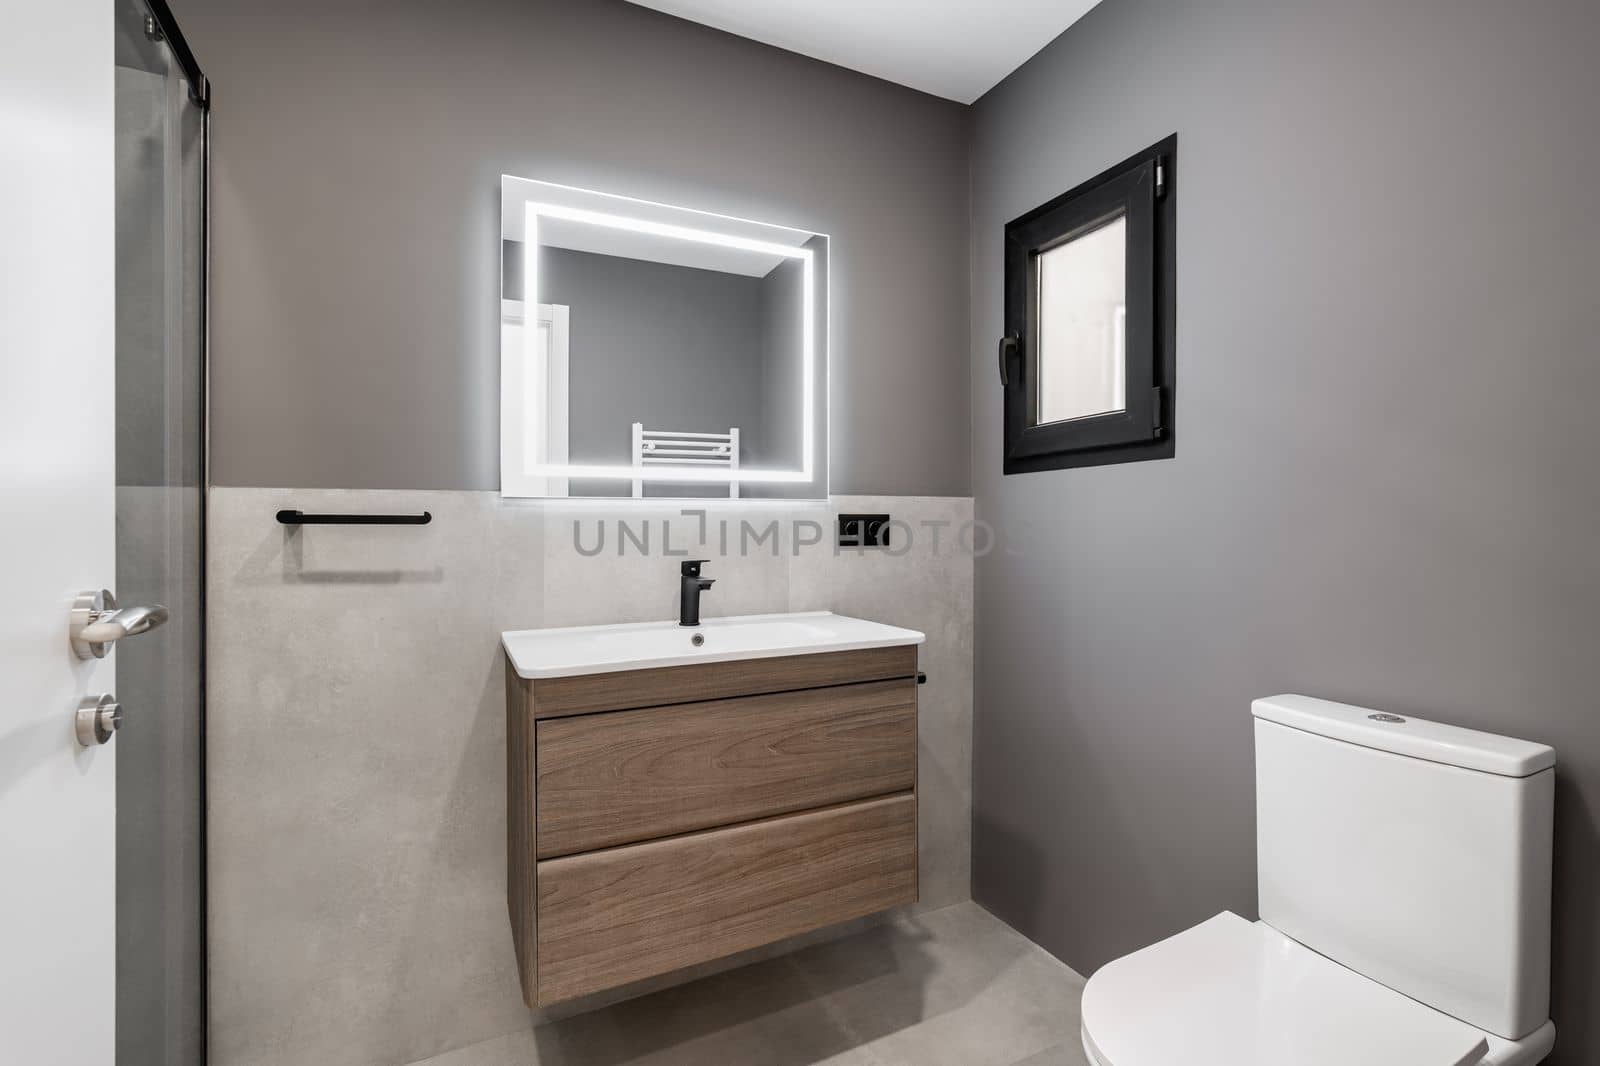 Part of the bathroom in gray and white pastel colors with a matte white ceiling. Sink on a wooden countertop with drawers. On the tiled floor against the wall is a white toilet with a closed lid. by apavlin